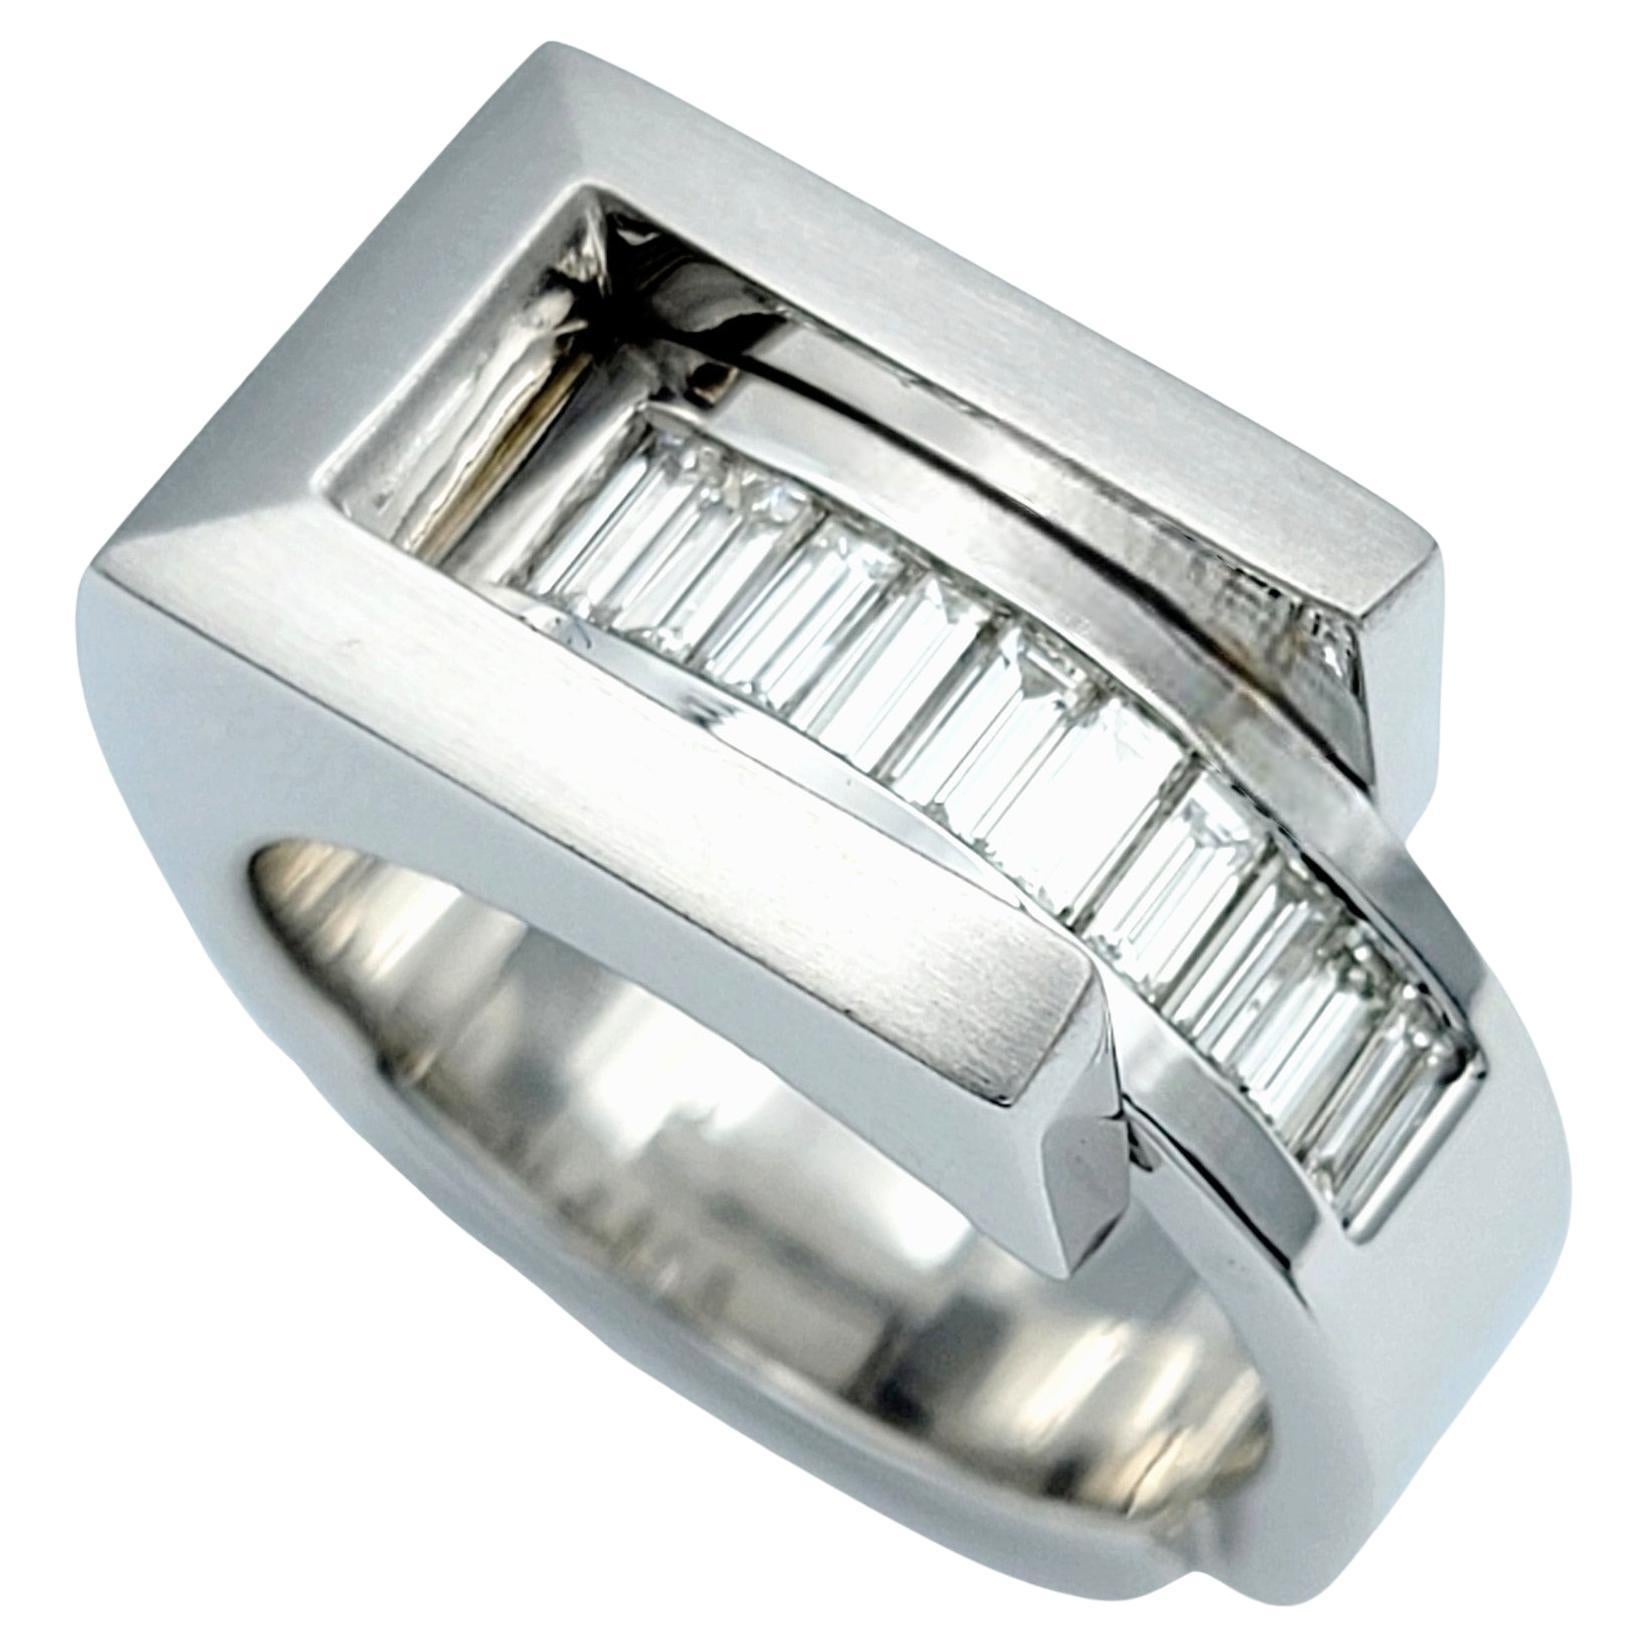 Gauthier Mens Asymmetrical Baguette Diamond Band Ring in Brushed & Polished Gold